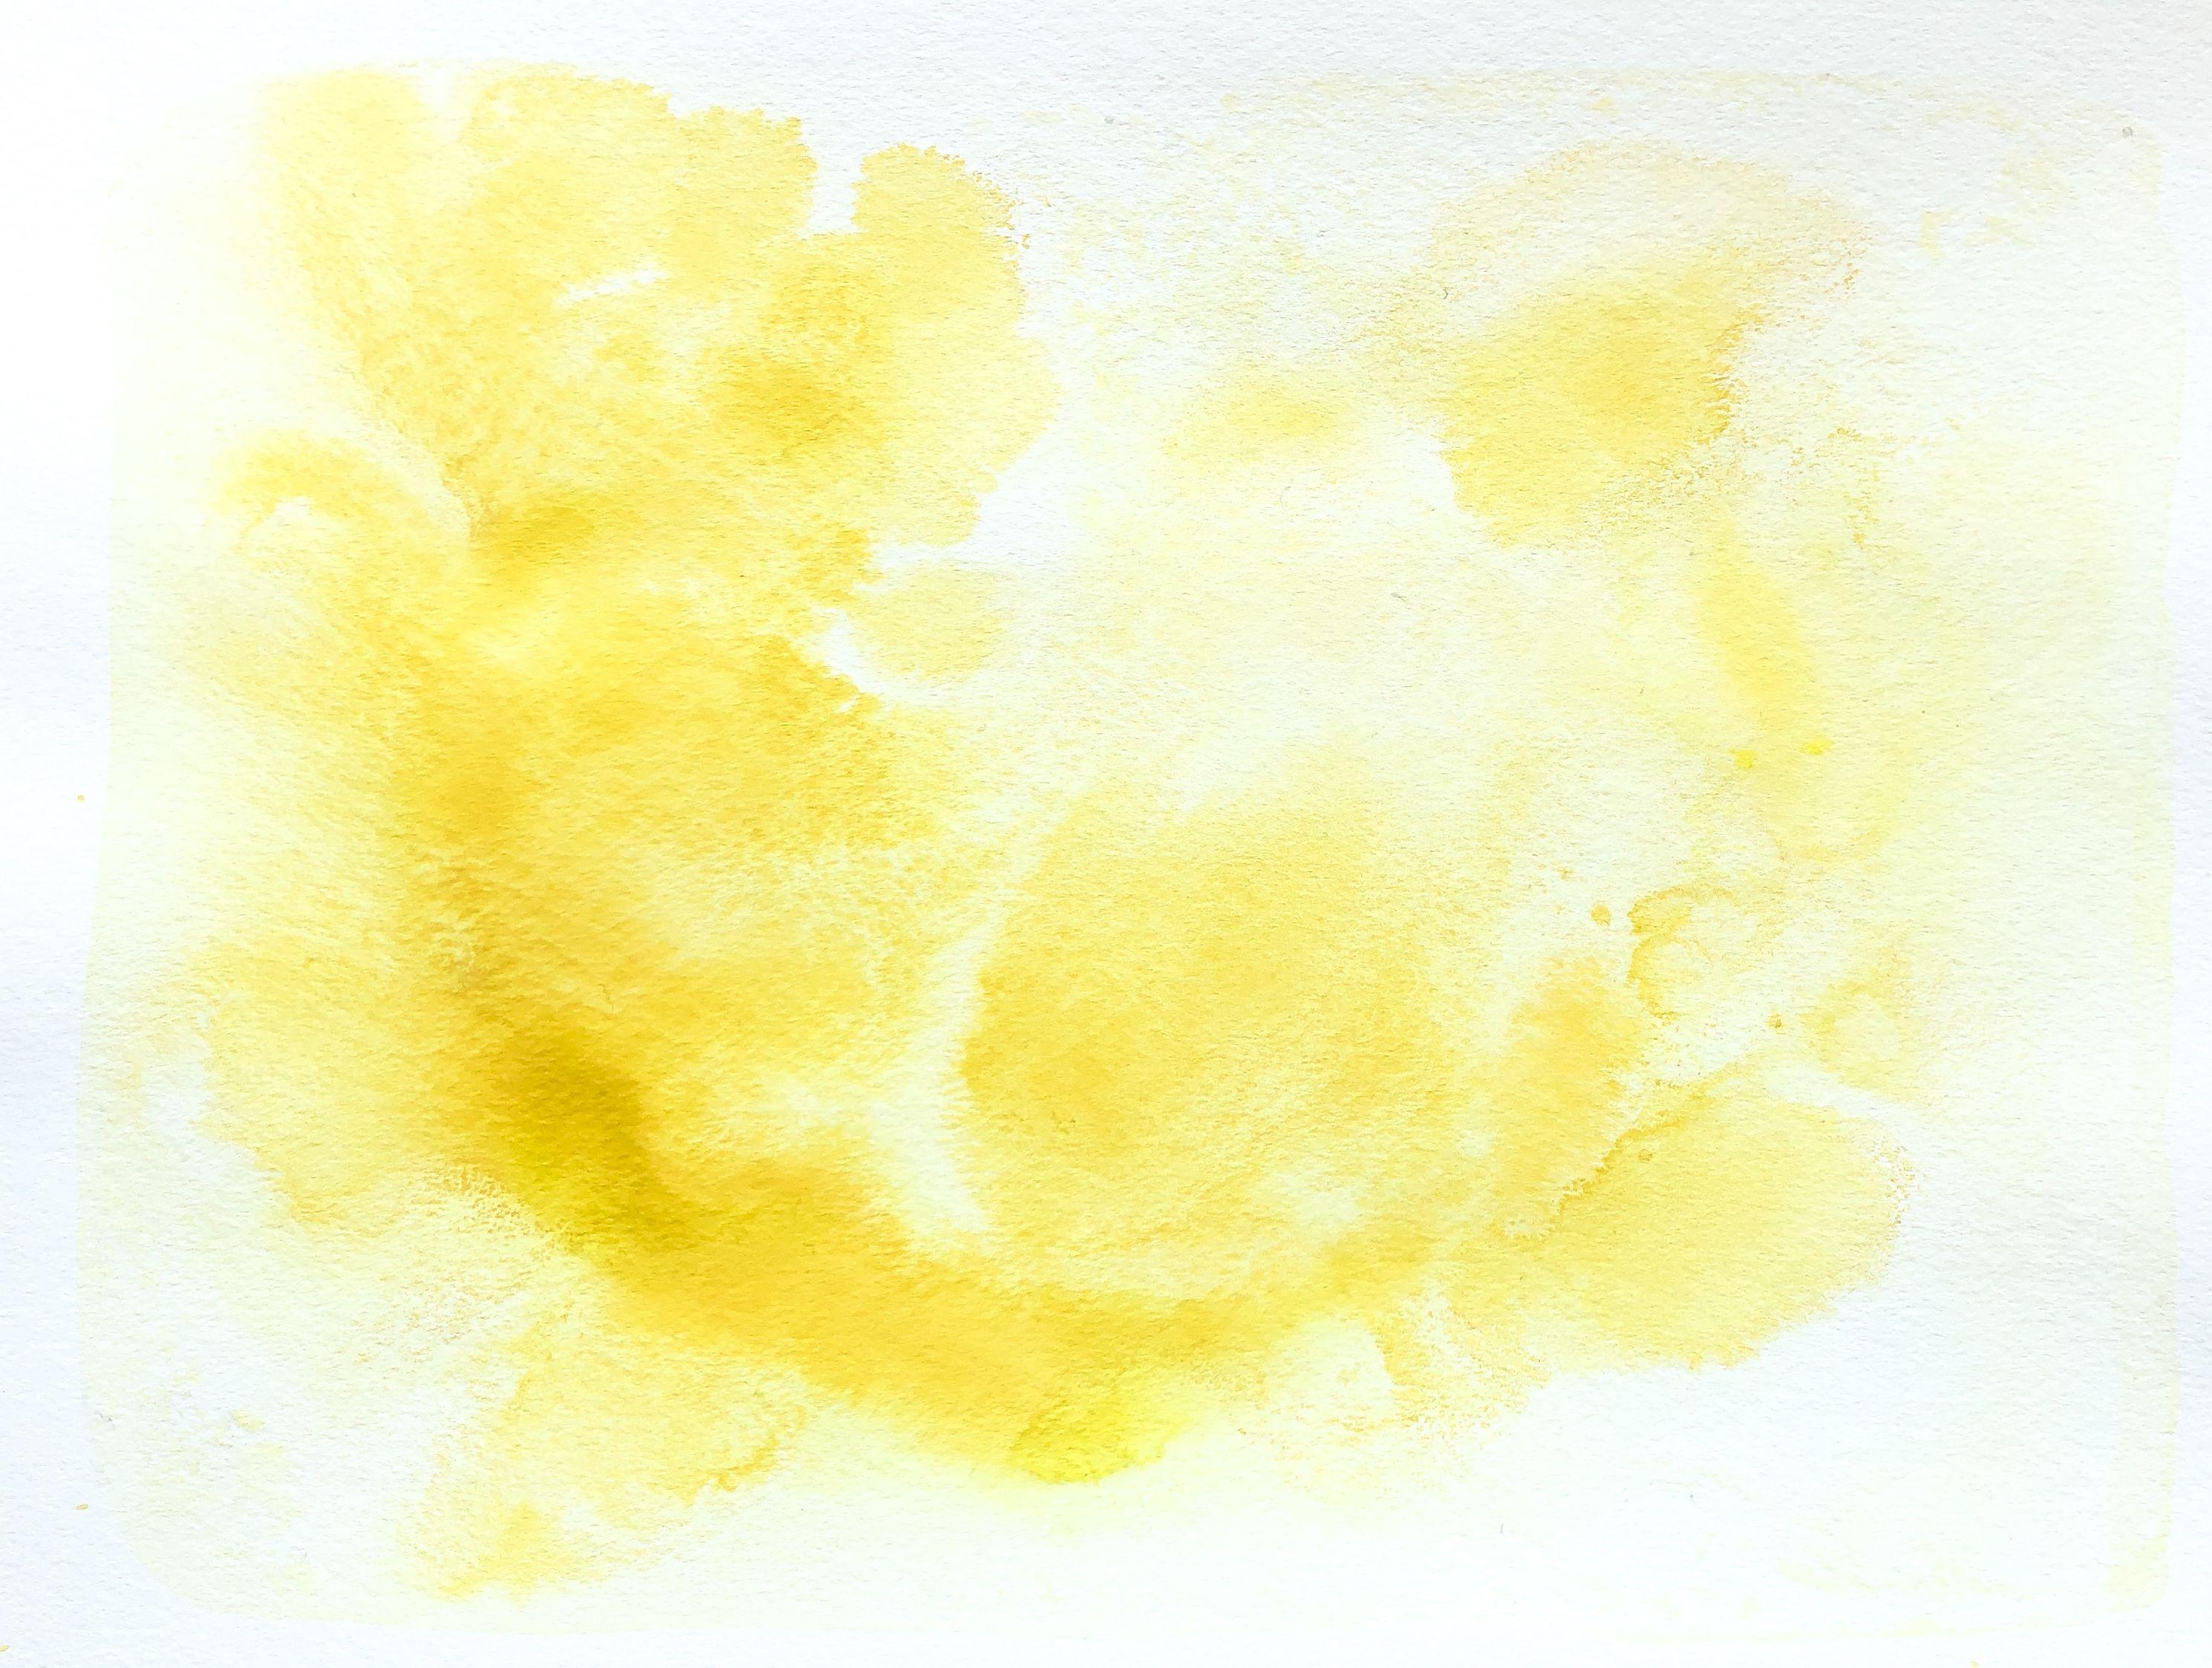 Vivid and luscious plumes of golden yellow pigment splayed across heavy watercolor bond. It was created with salt water and acrylics. The combination causes wonderful reactions, resulting in organic branching of pigments. This piece works equally